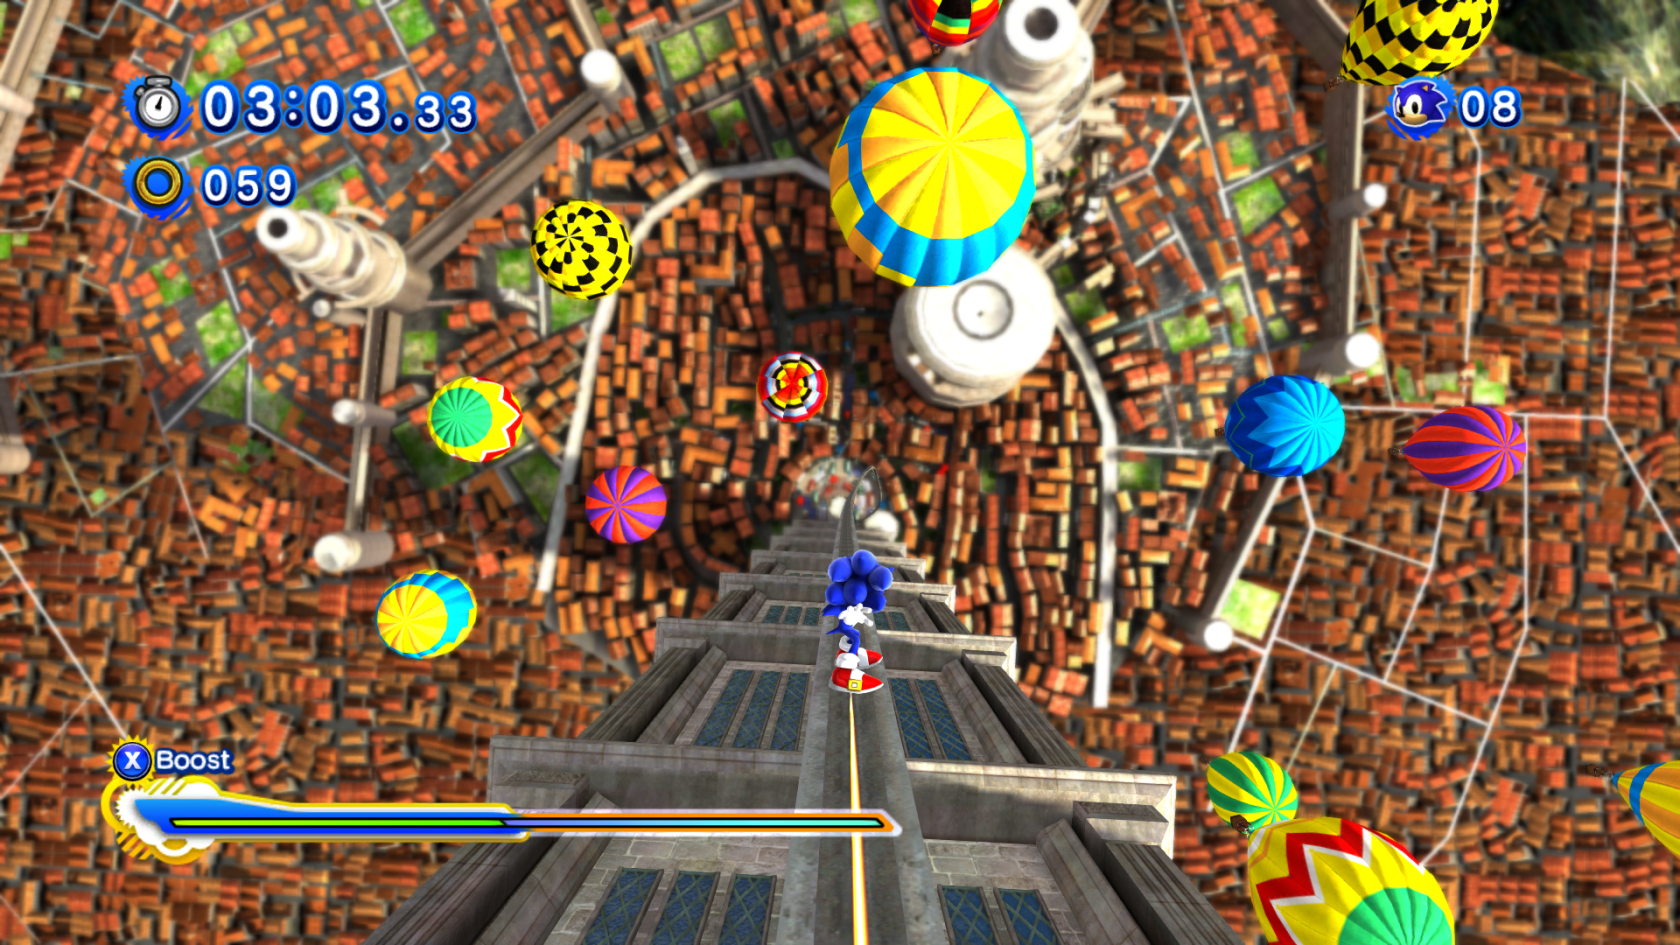 Video Game Sonic Generations HD Wallpaper | Background Image